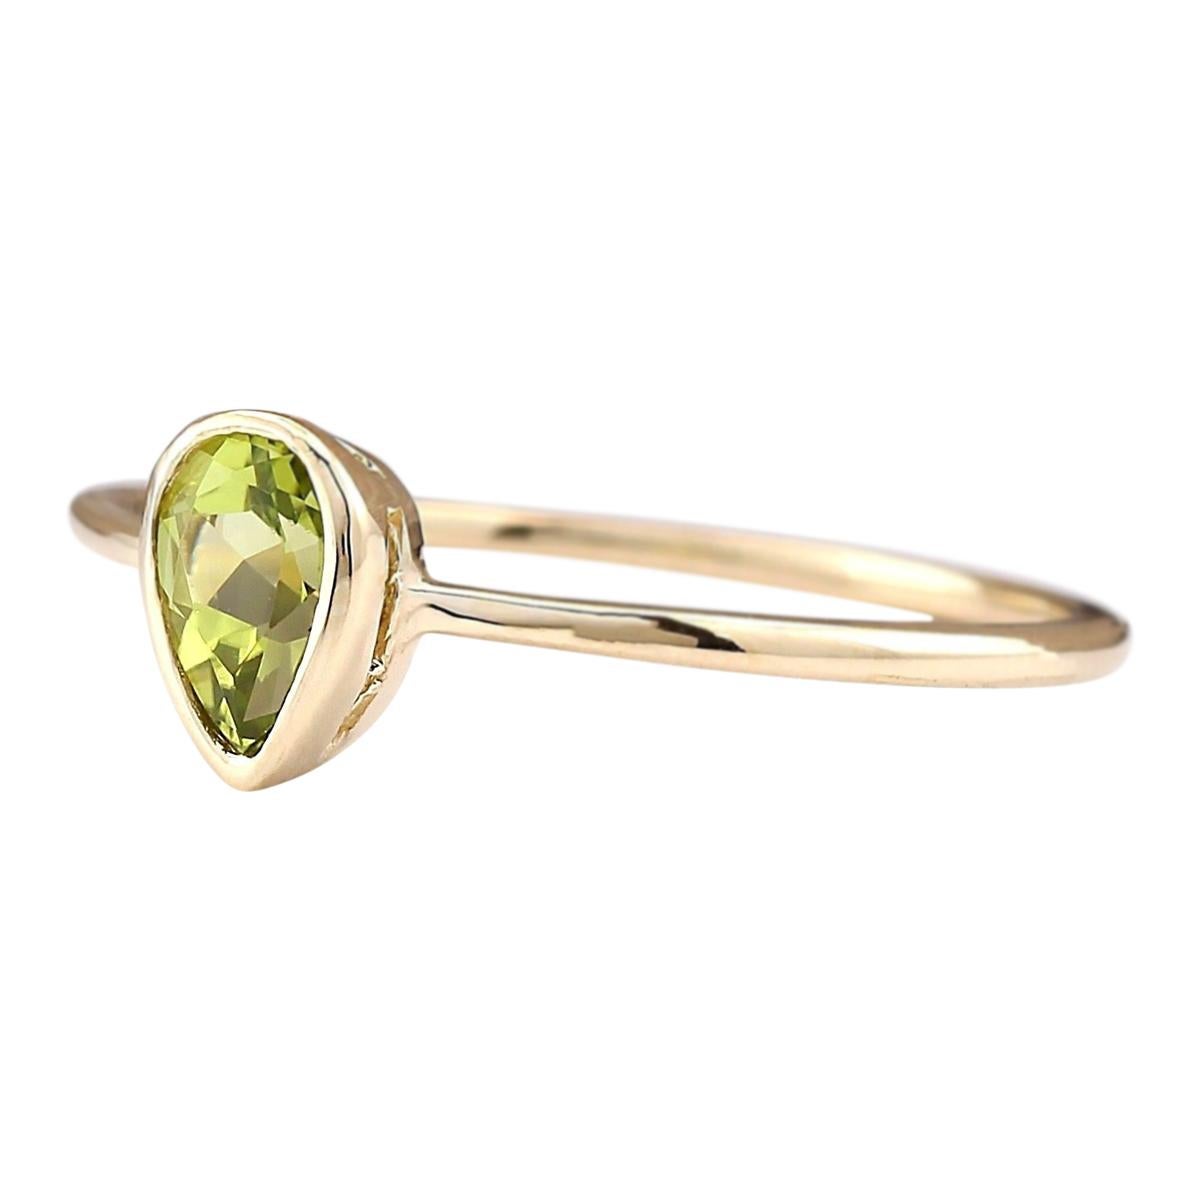 Stamped: 14K Yellow Gold
Total Ring Weight: 1.1 Grams
The total Natural Peridot Weight is 0.50 Carat
Color: Green
Face Measures: 6.00x4.00 mm
Sku: [703203W]